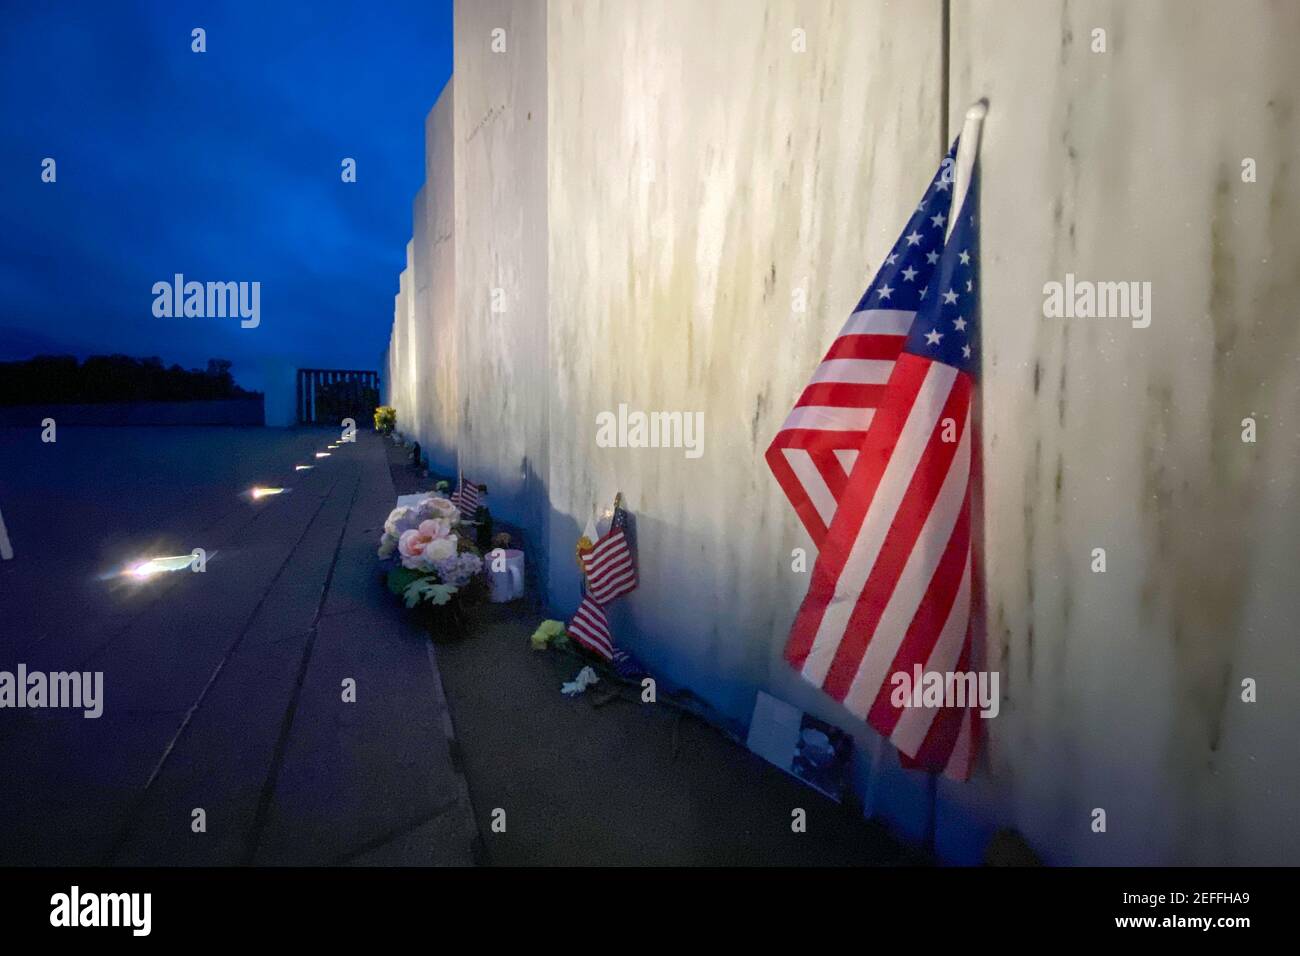 American flag against wall of names of those who died on Flight 93, Shanksville, PA Stock Photo